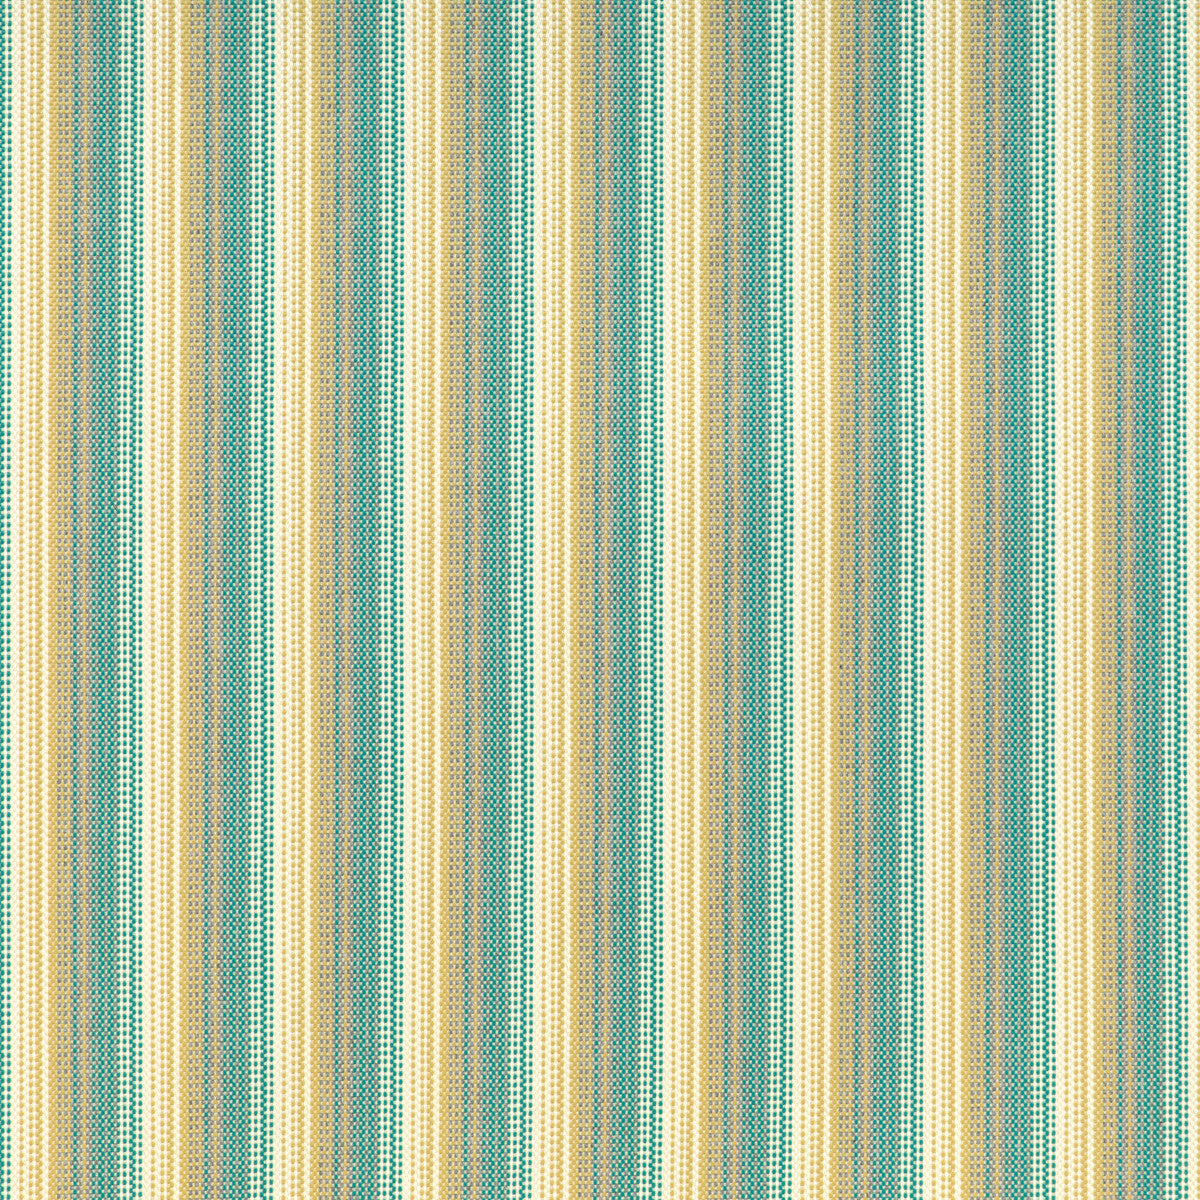 Baystreet fabric in paradise color - pattern 37068.314.0 - by Kravet Contract in the Chesapeake collection